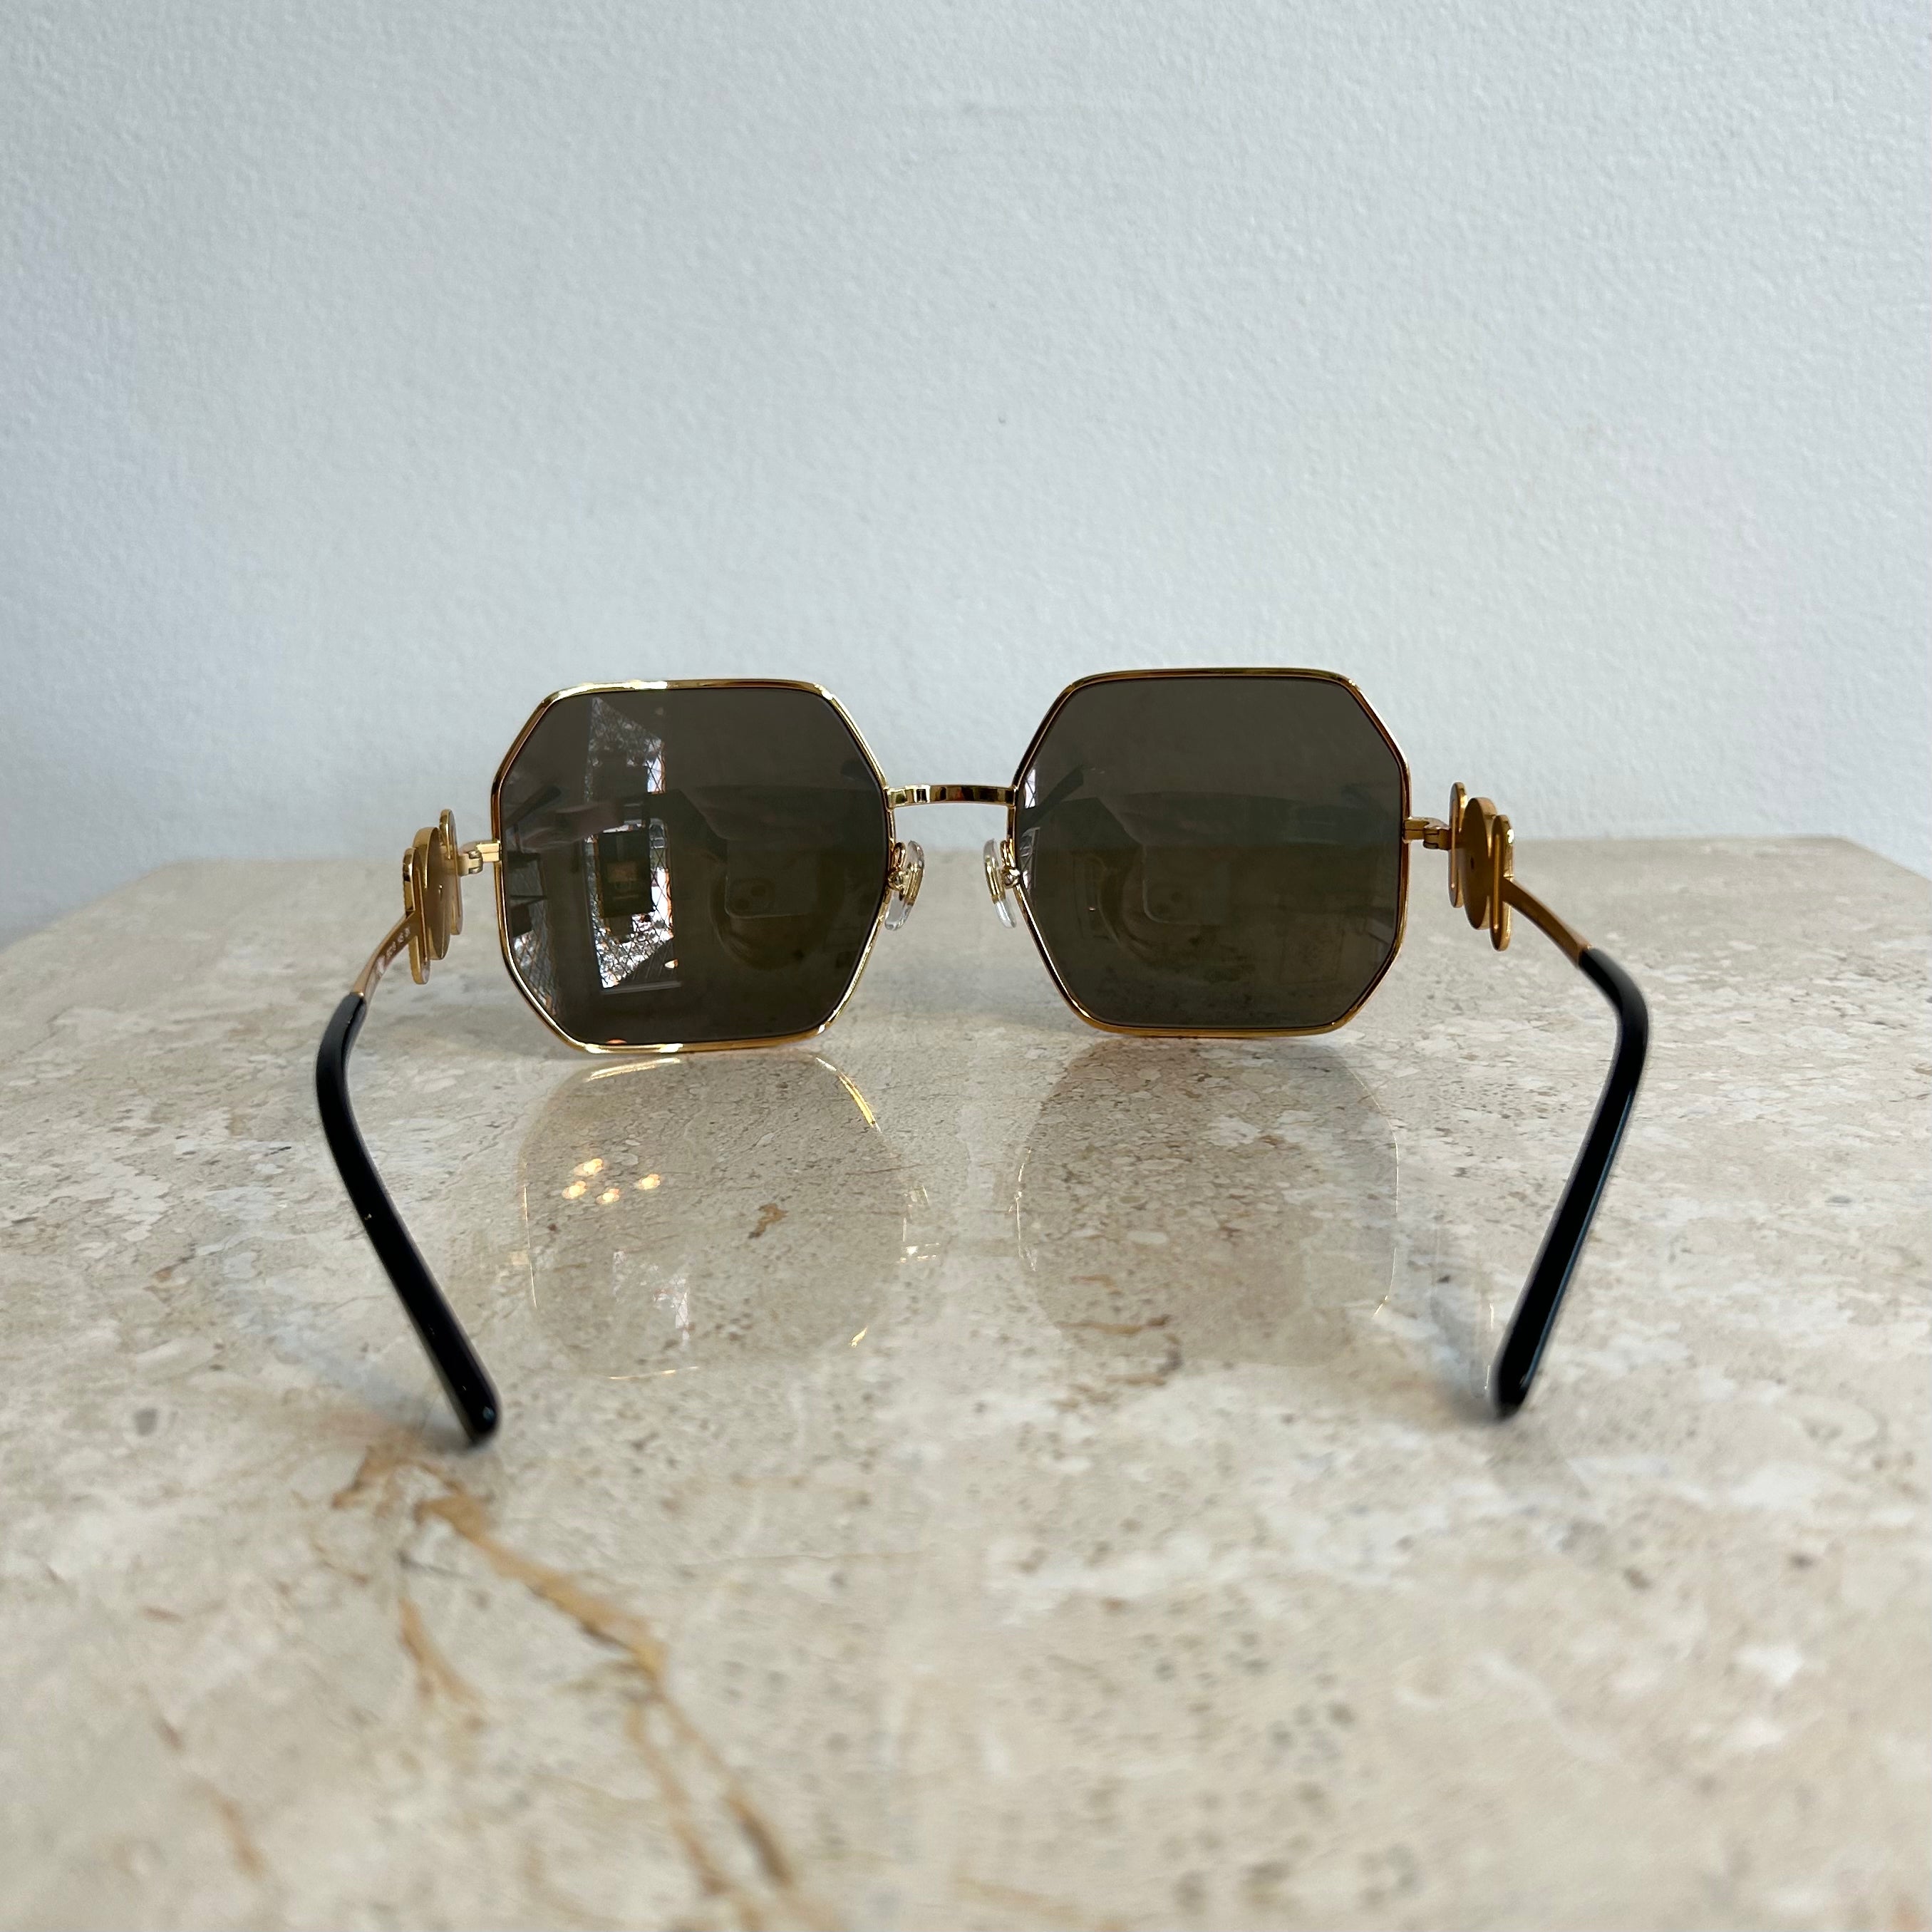 Pre-Owned VERSACE VE2248 Gold Rimmed Sunglasses